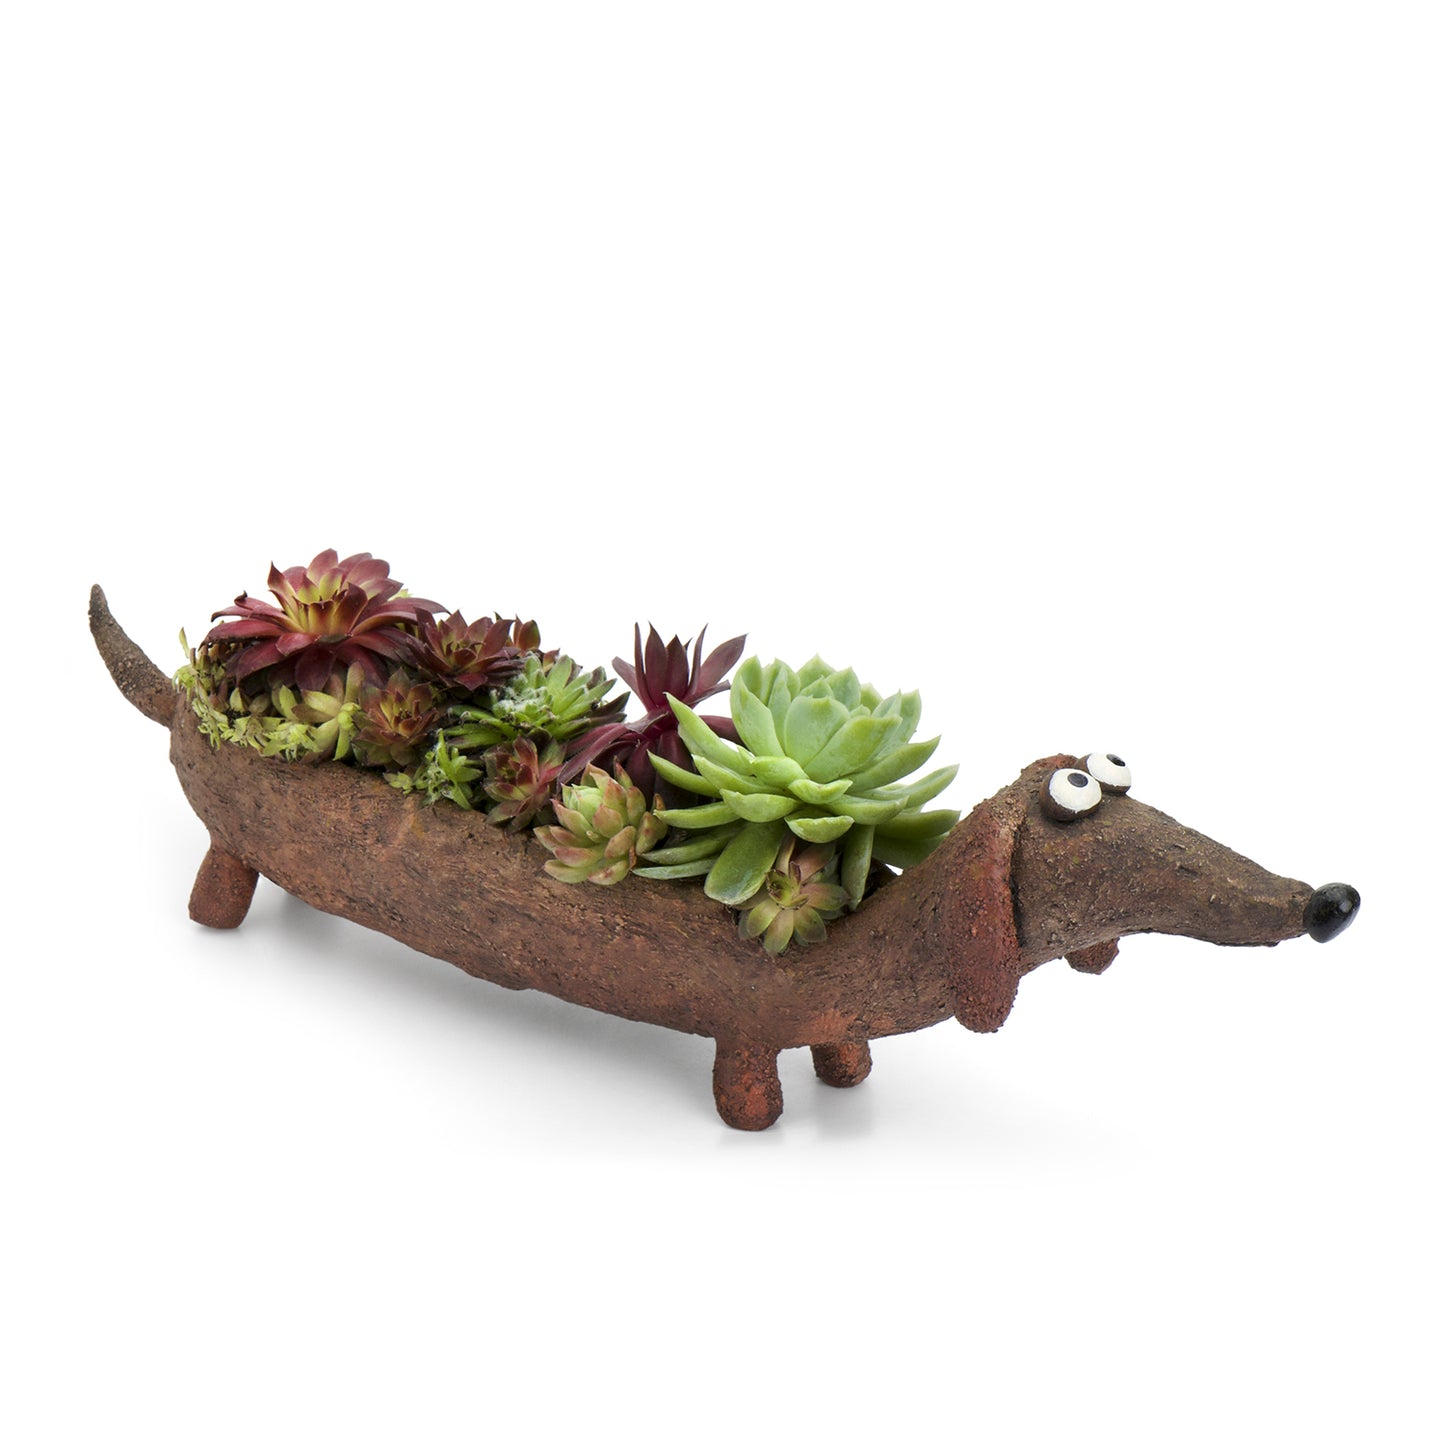 Rufus Doxin the Dog Planter